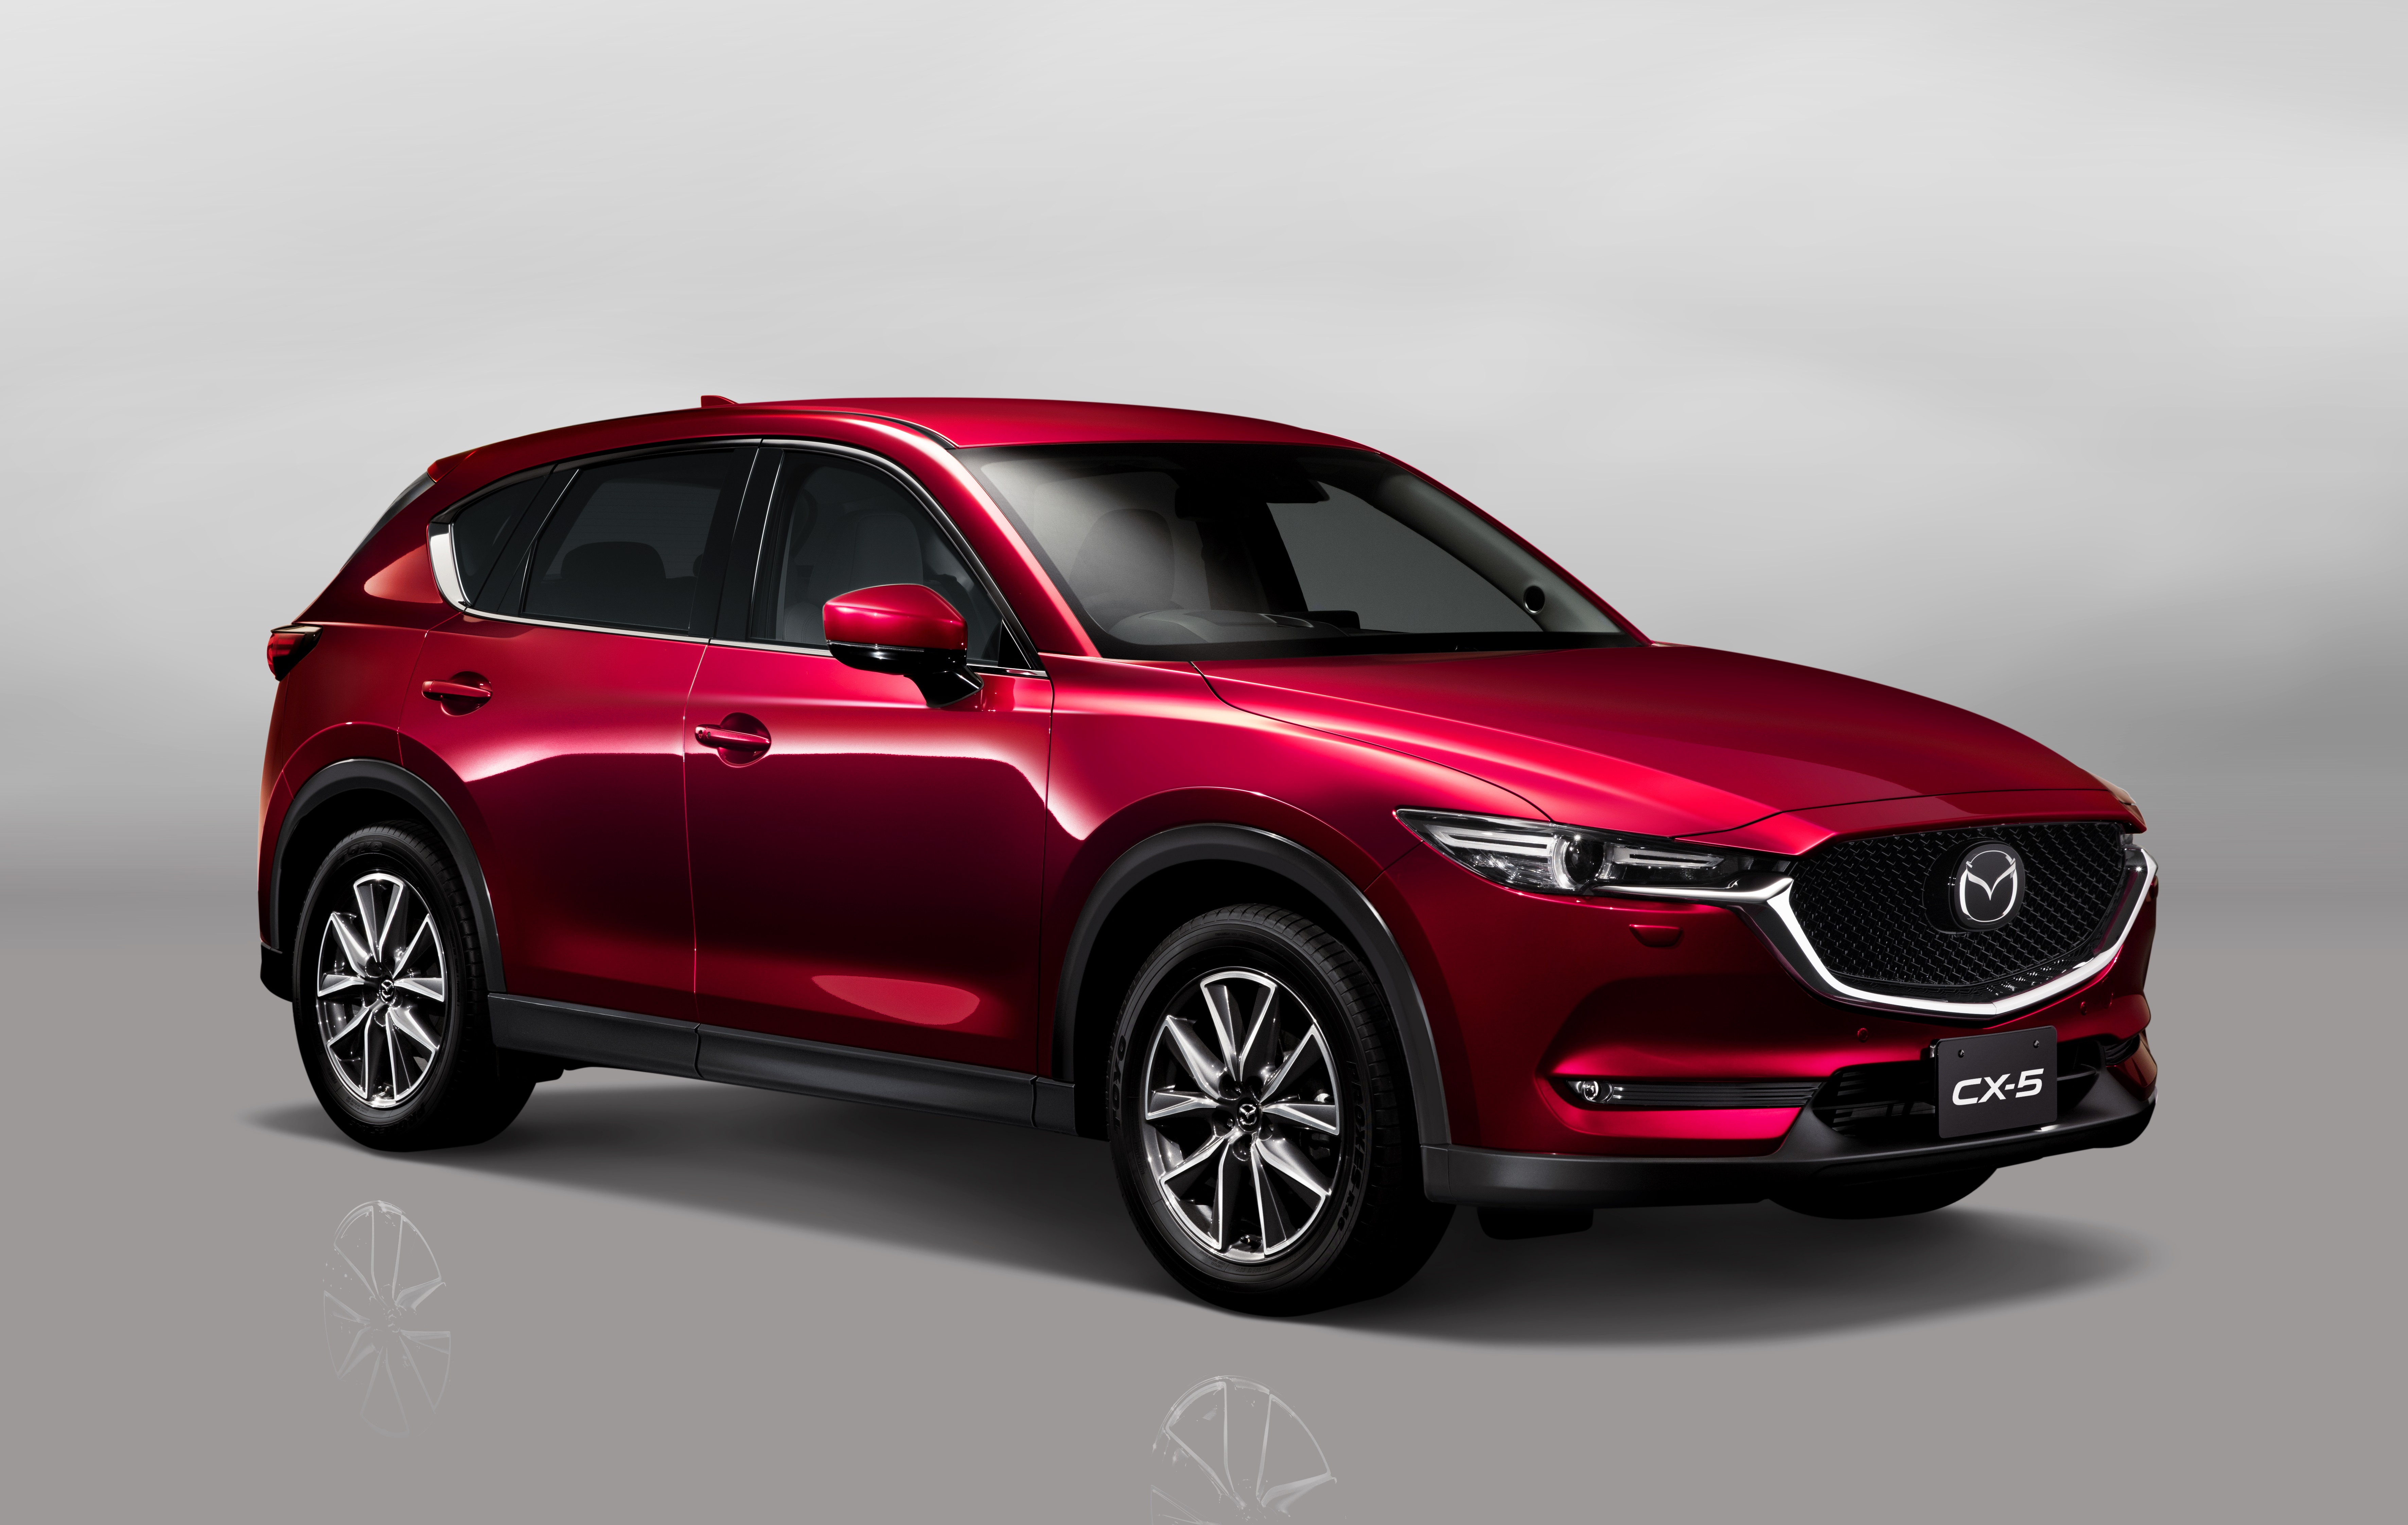 the all-new mazda cx-5 is now launched in singapore